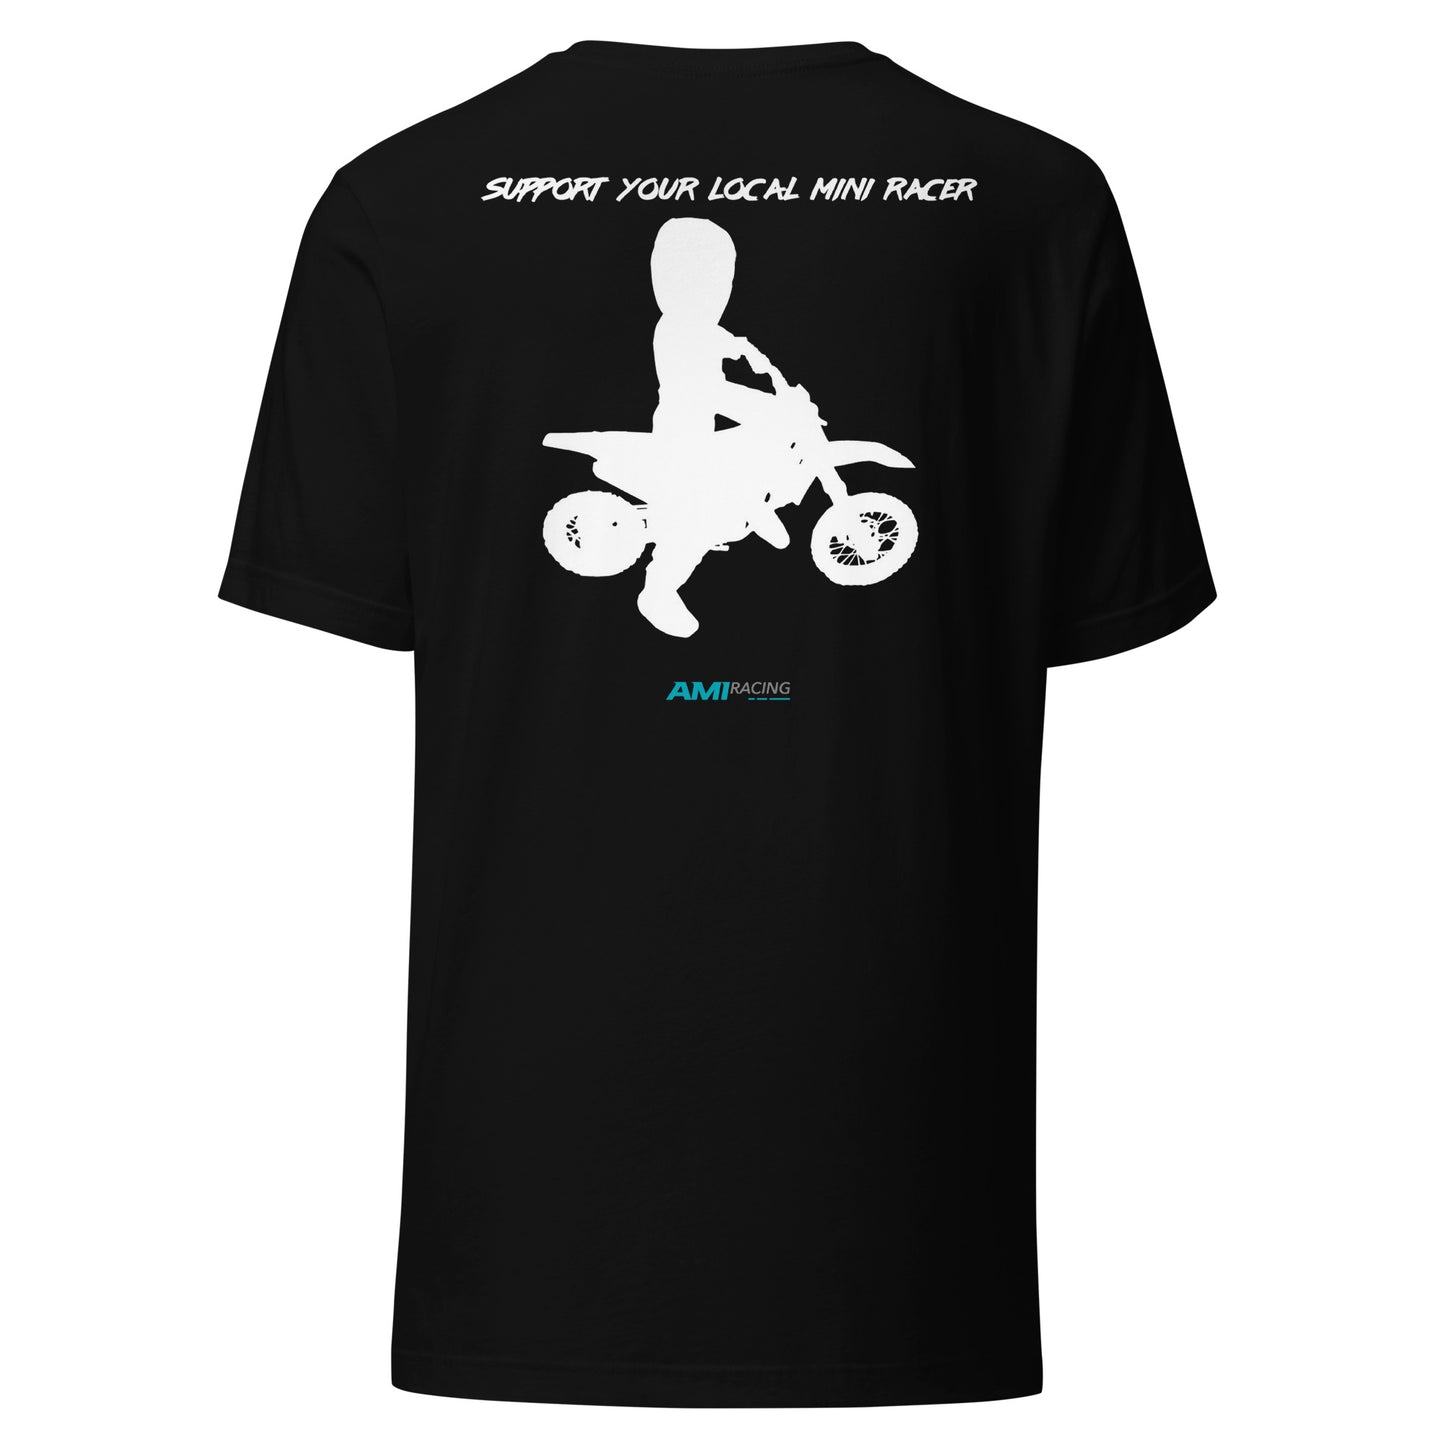 AMI Racing Support Your Rider T-Shirt